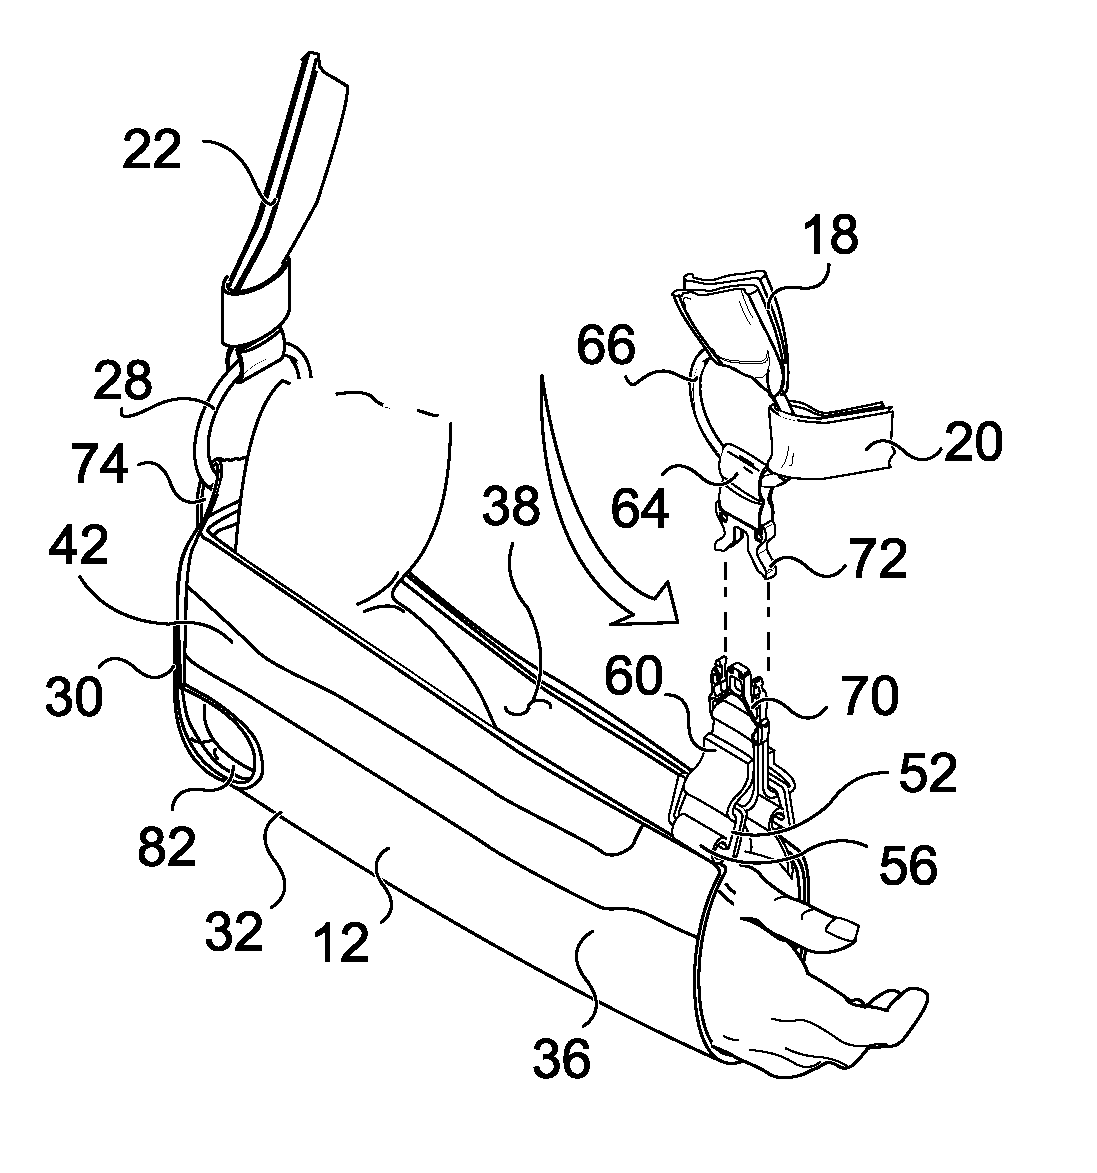 Shoulder orthosis having a supportive strapping system